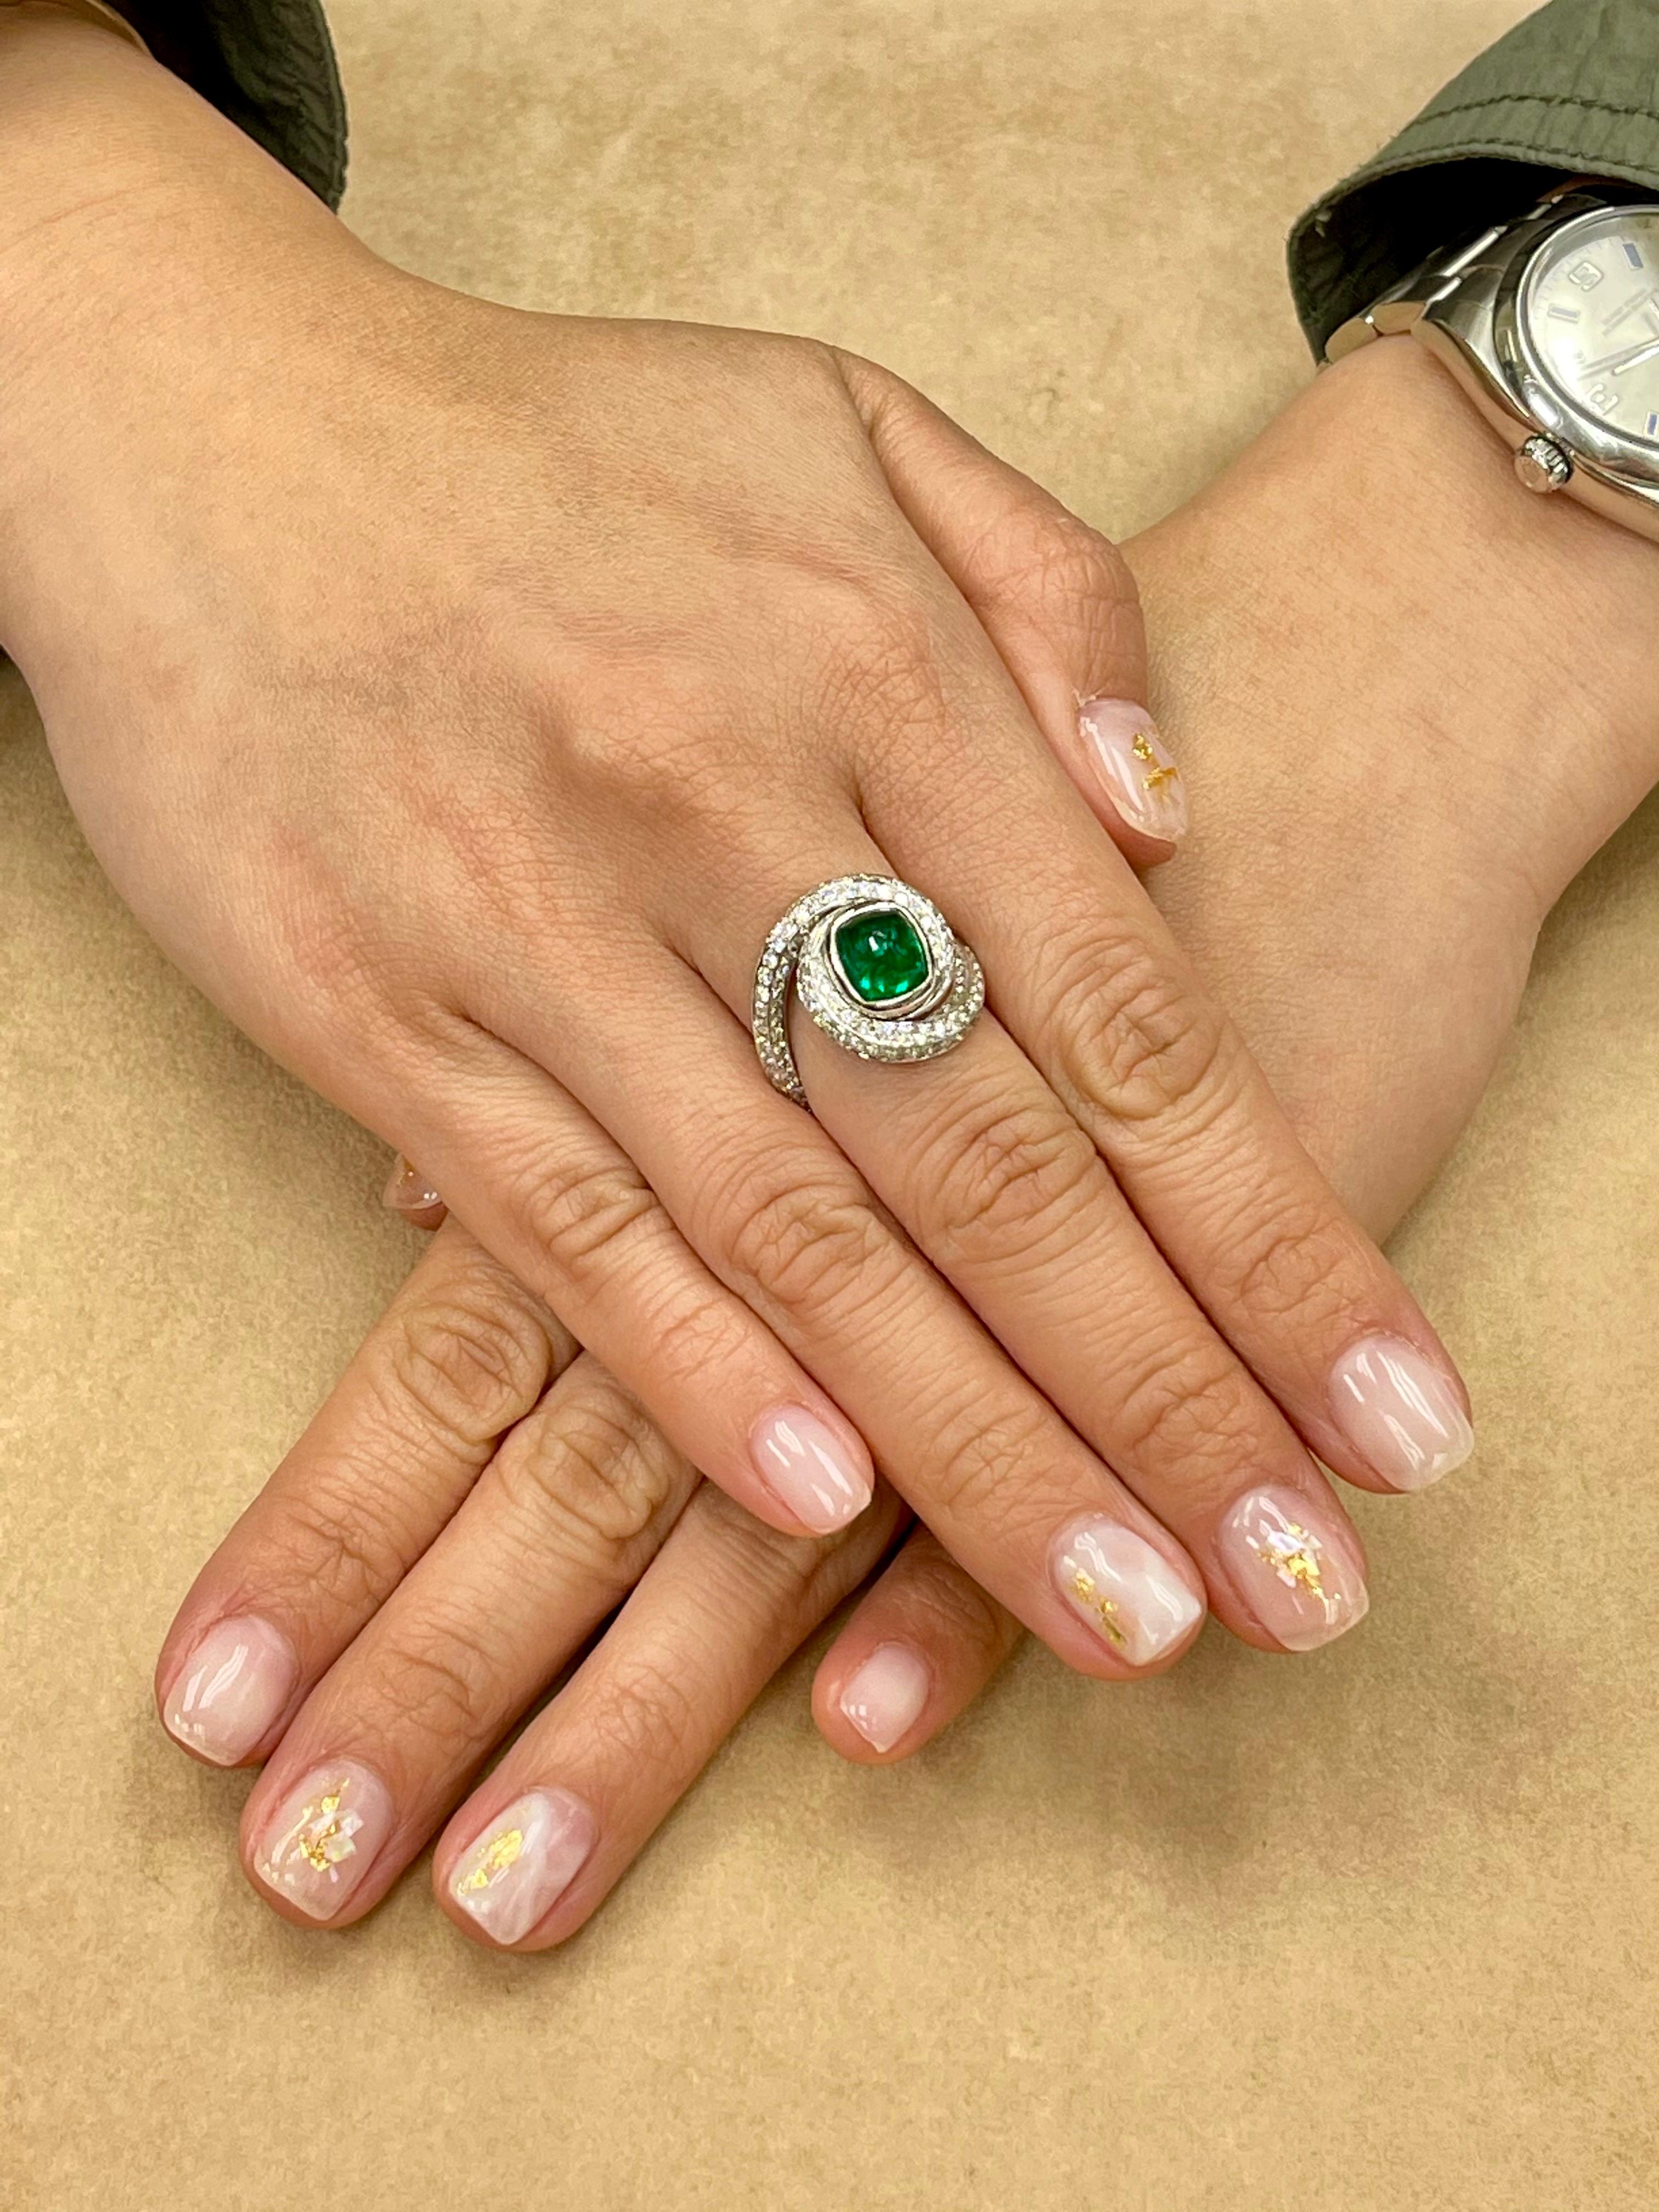 Here is a nice sugarloaf Emerald and diamond ring. The ring is set in 18k white gold and white diamonds. The center emerald is 2.07cts. There are 183 small white diamonds totaling 1.82cts surrounding the ring. The emerald has the vivid green color